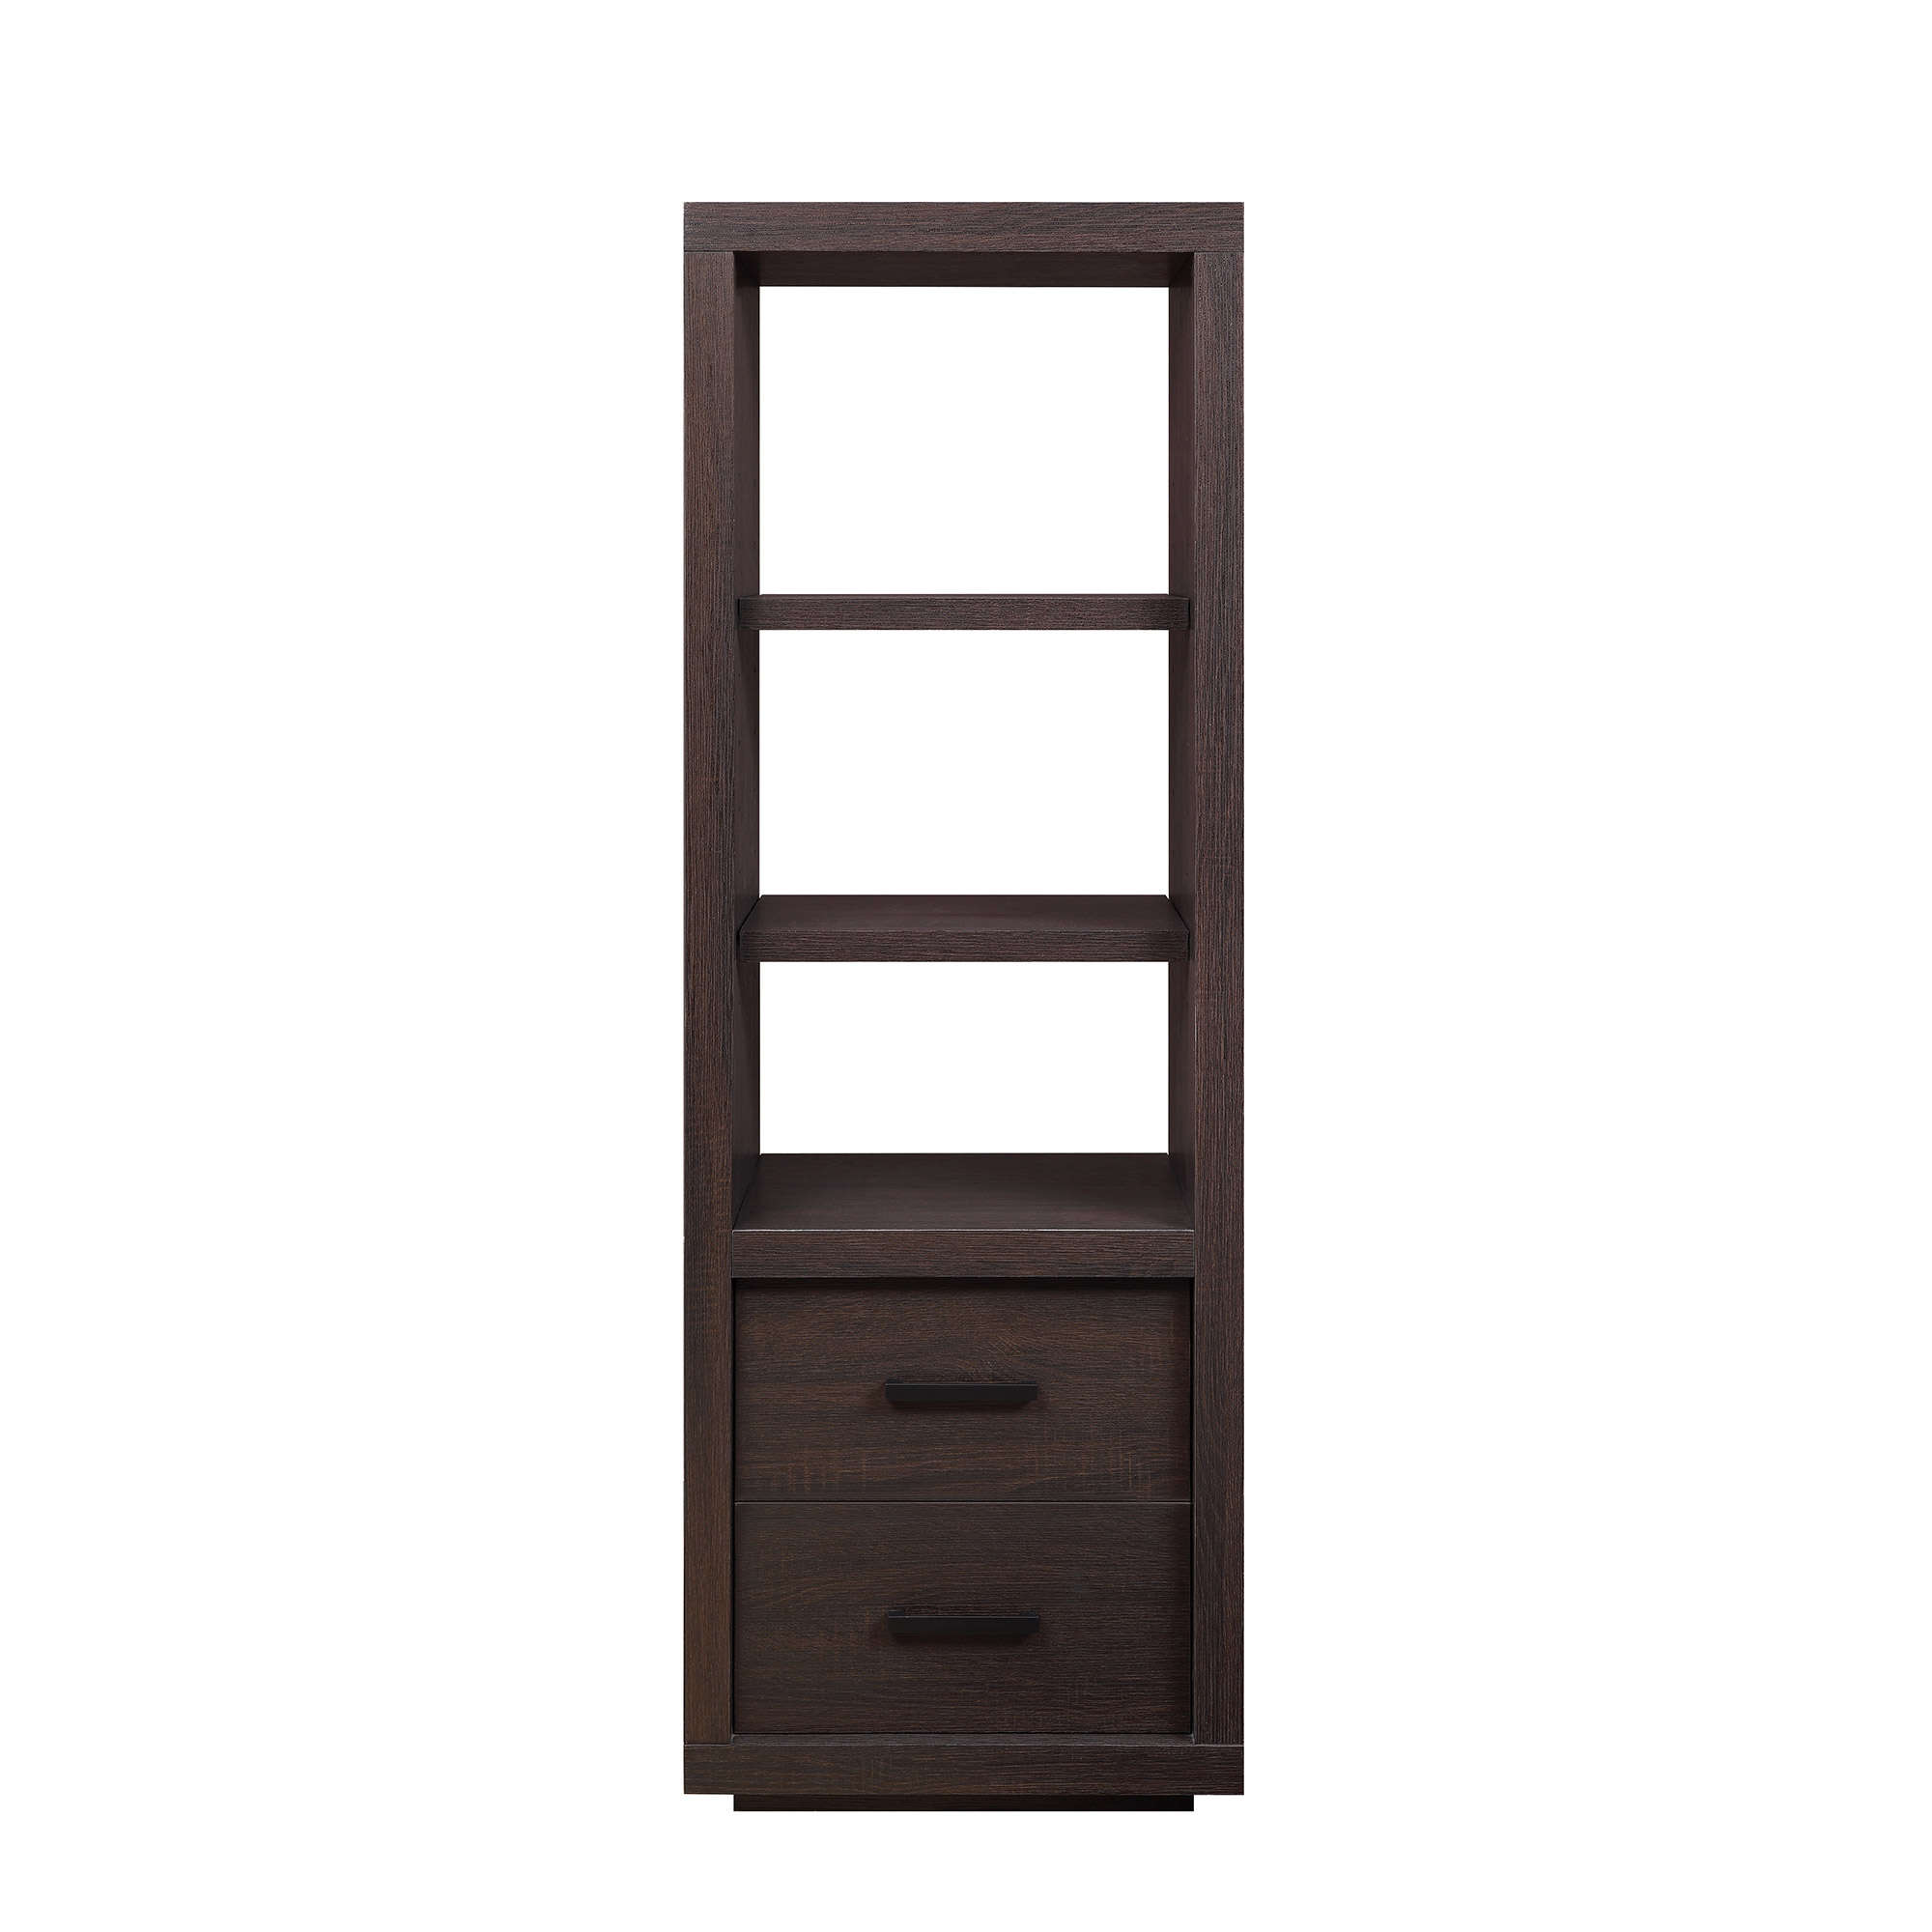 Better Homes & Gardens Steele Storage Bookcase - image 4 of 10